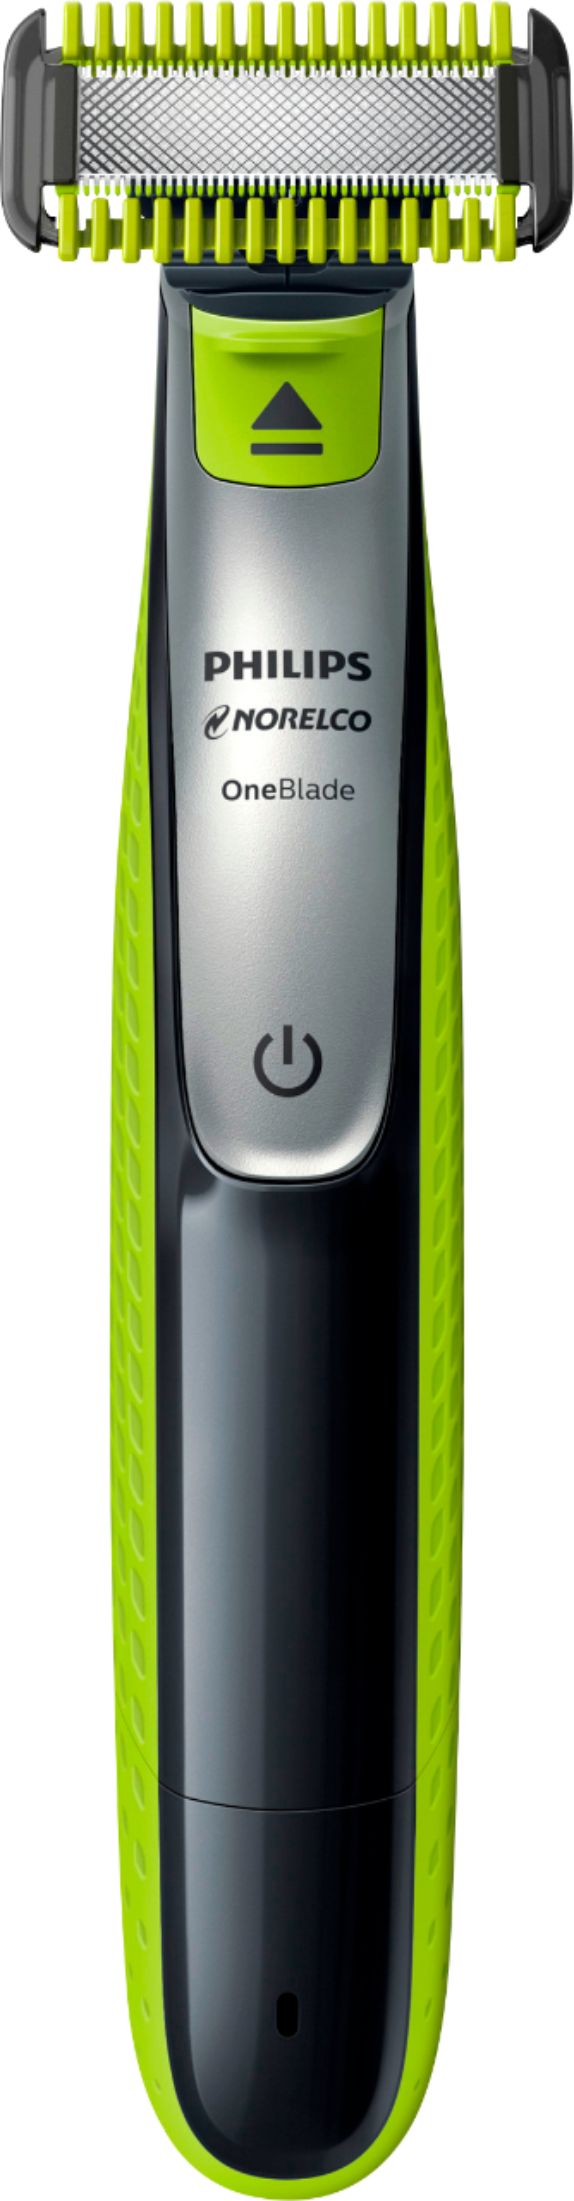 Philips Norelco OneBlade + Body hybrid electric trimmer and shaver, QP2630/70 Black, Green, Silver - Best Buy